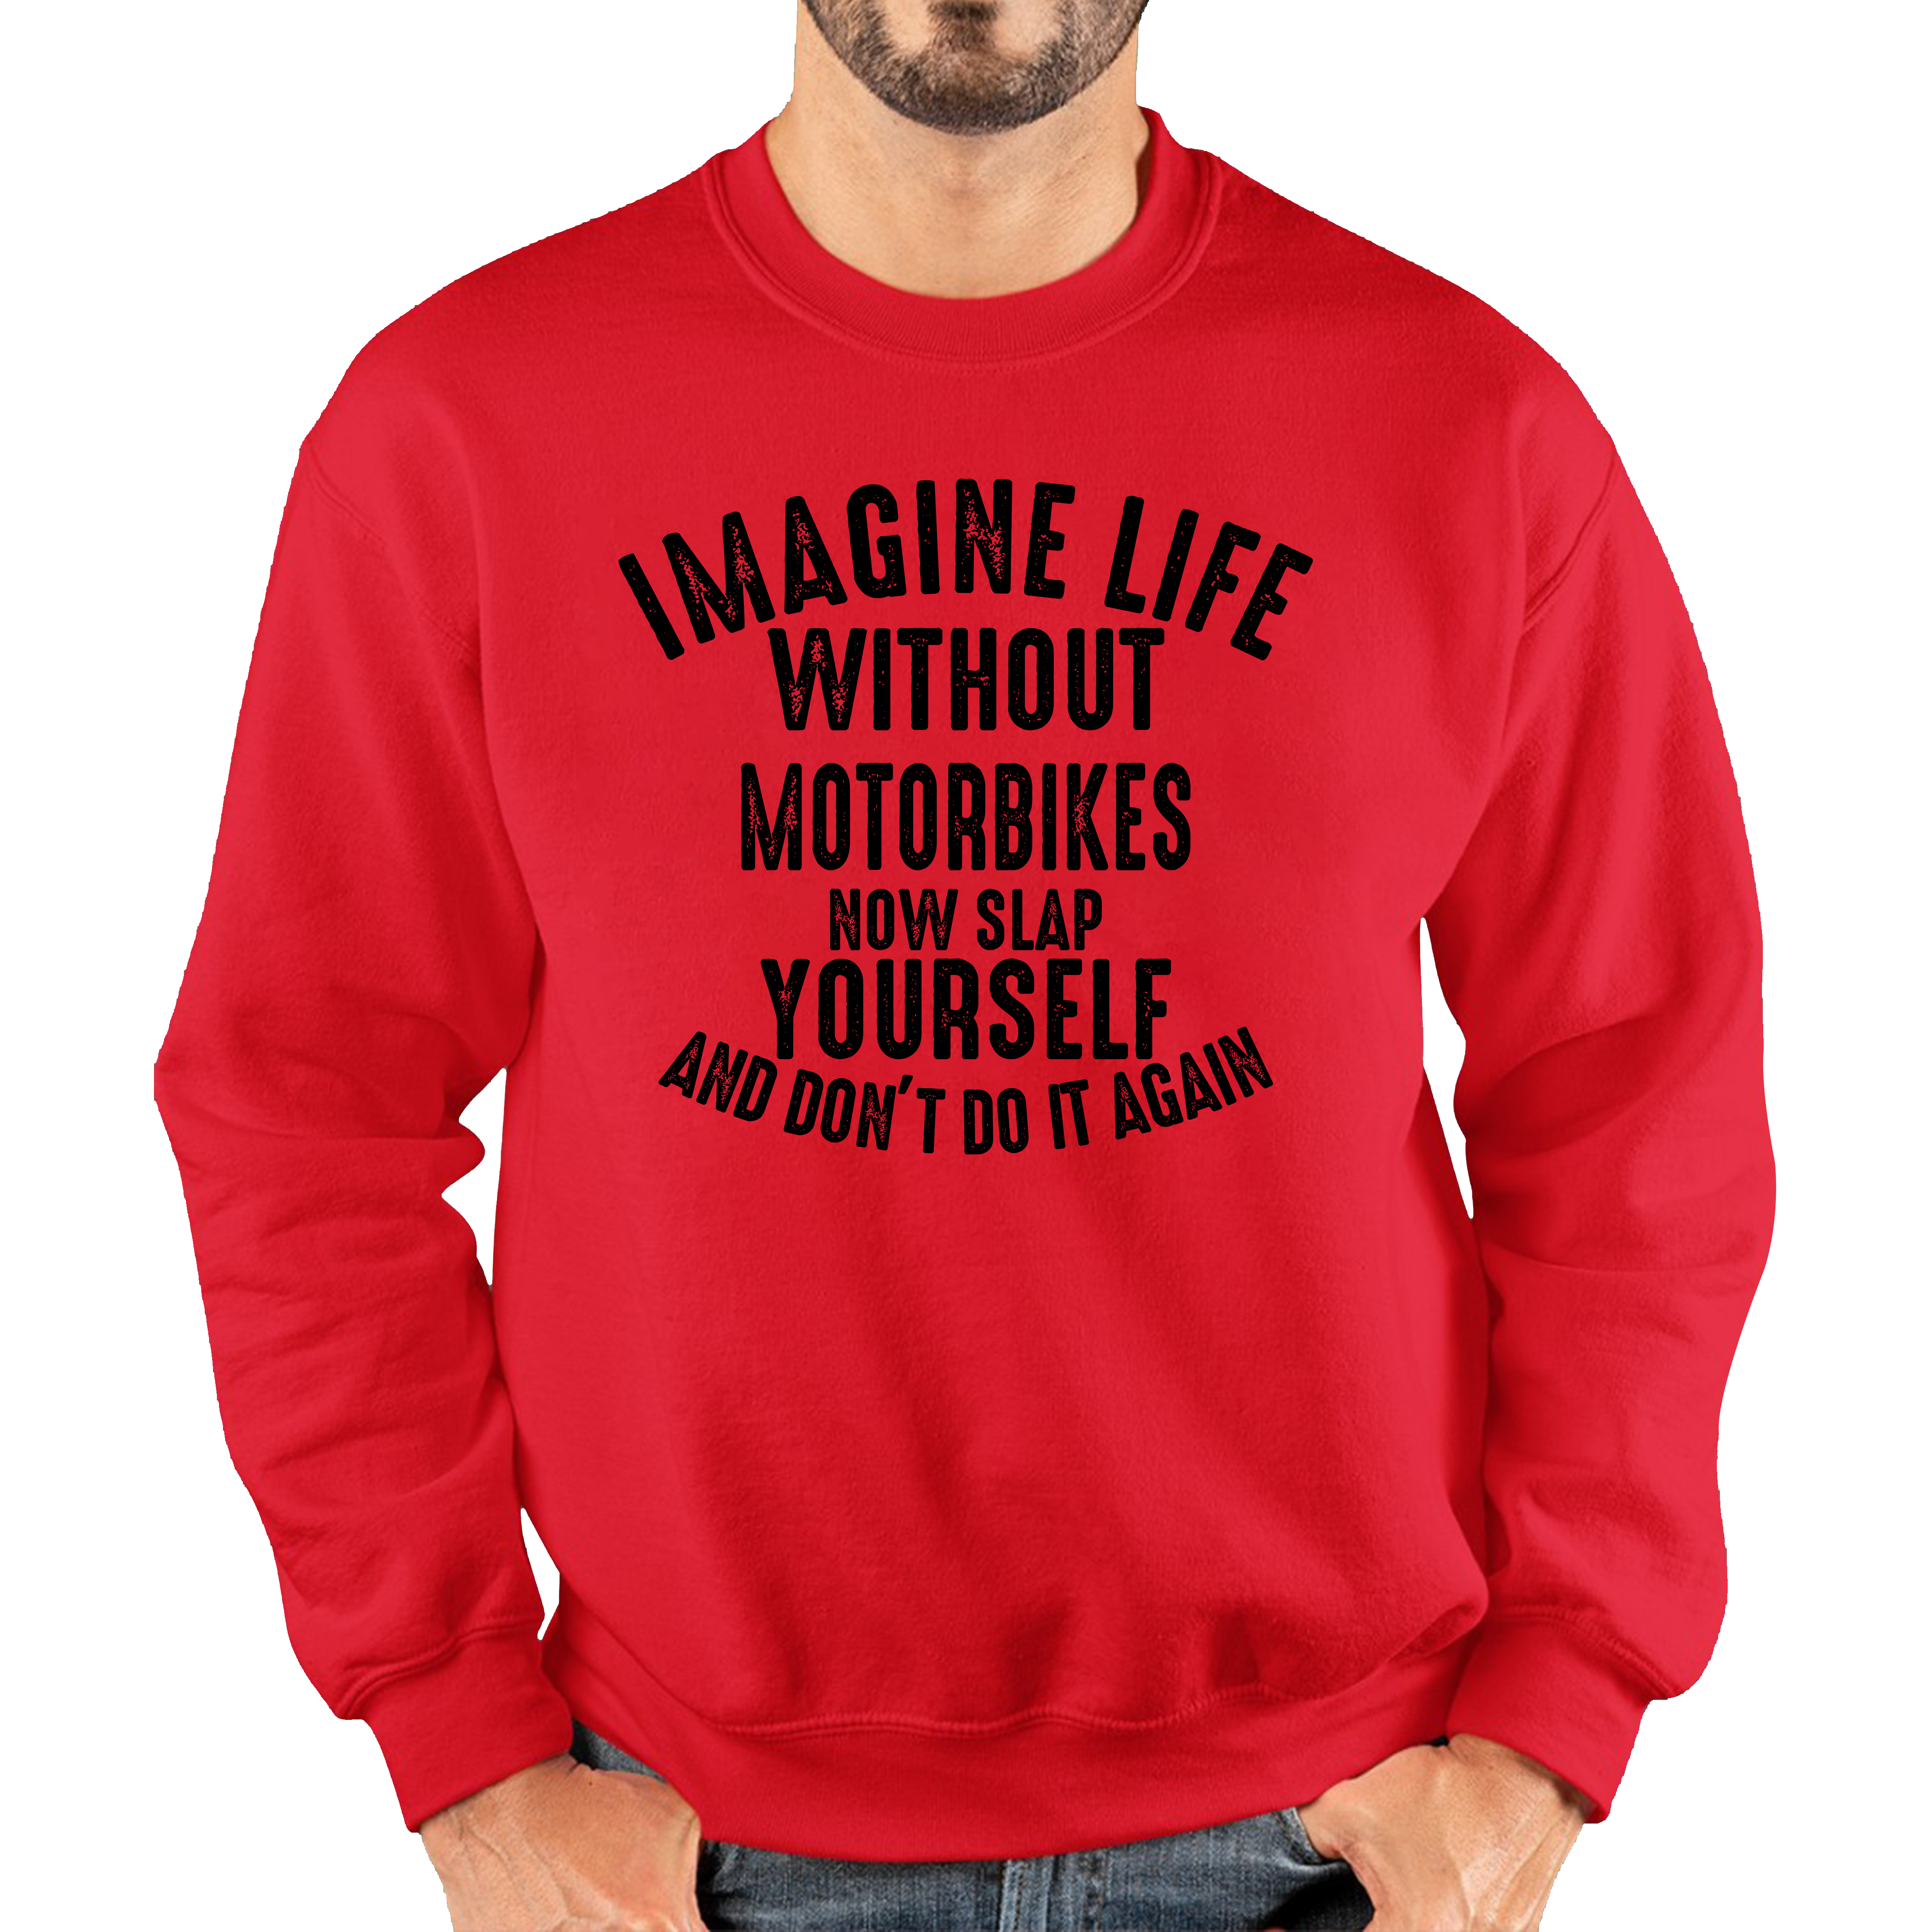 Imagine Life Without Motorbikes Now Slap Yourself And Don' Do It Again Jumper Bike Lovers Racers Riders Funny Joke Unisex Sweatshirt